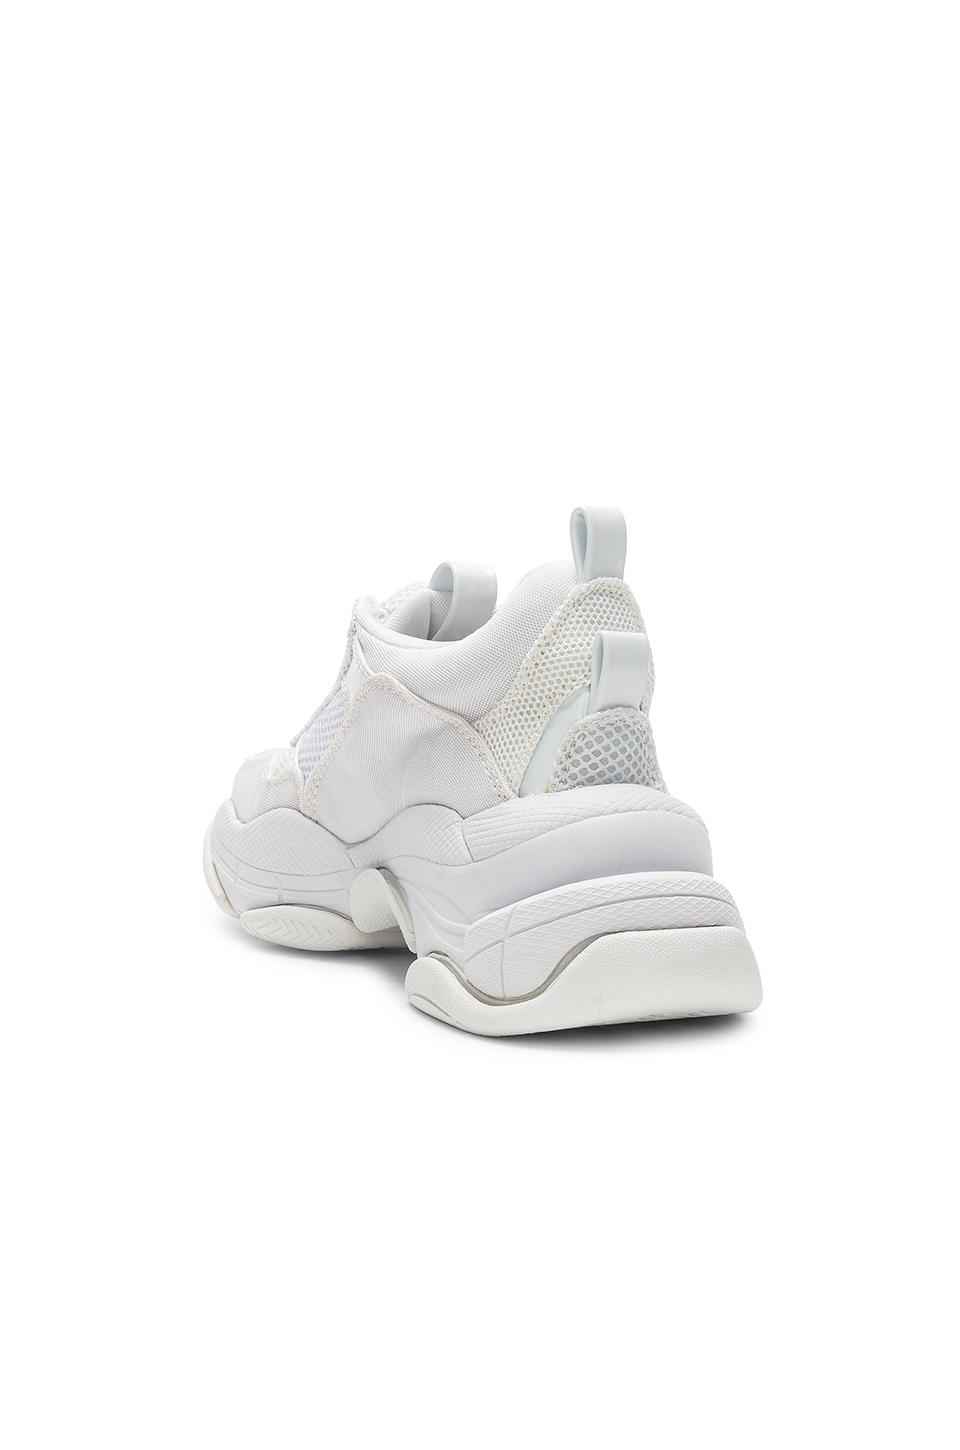 Campbell Lo-fi Sneakers in White | Lyst